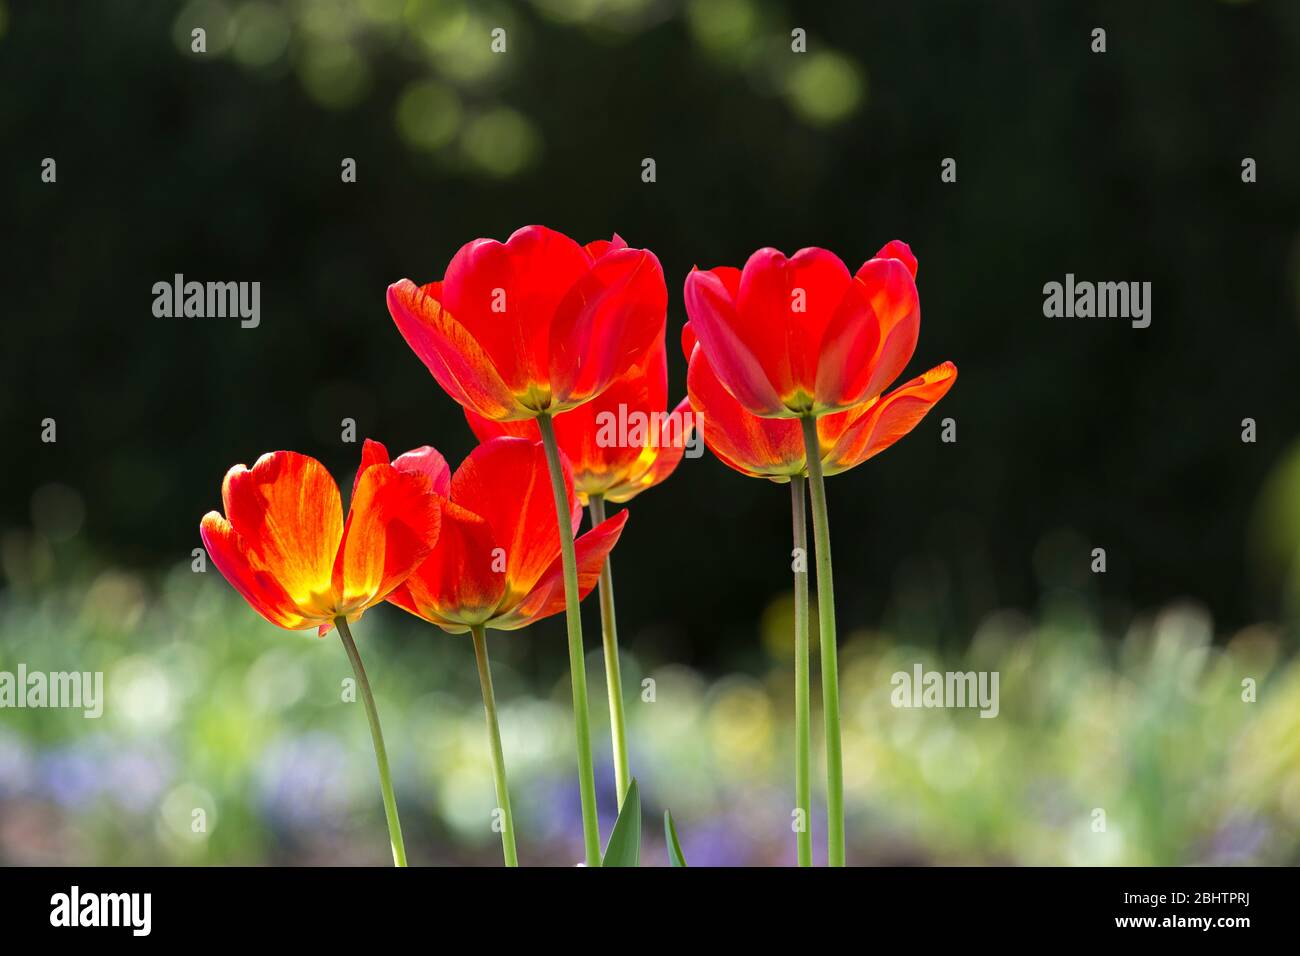 Bright low point of view photo of a small group of red tulips isolated against black shady background Stock Photo